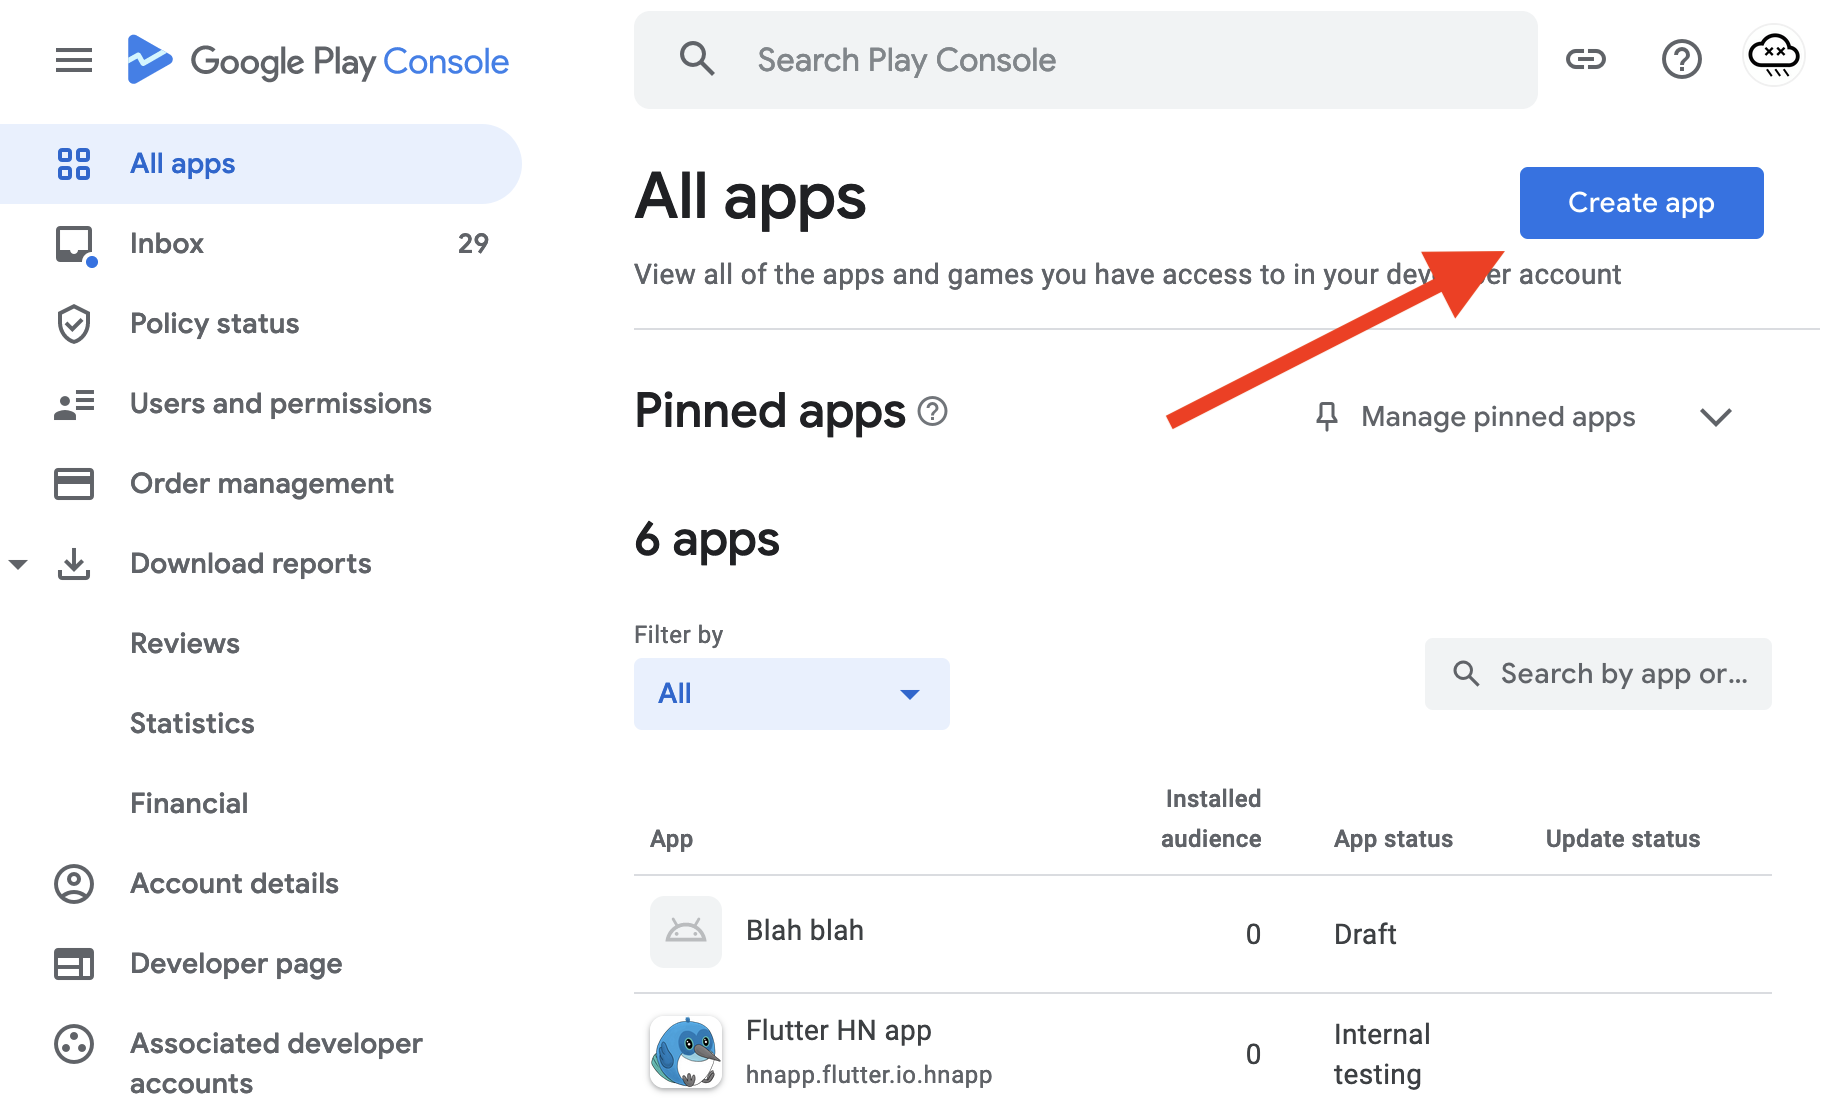 Screenshot of the 'Create app' button in Google Play Console